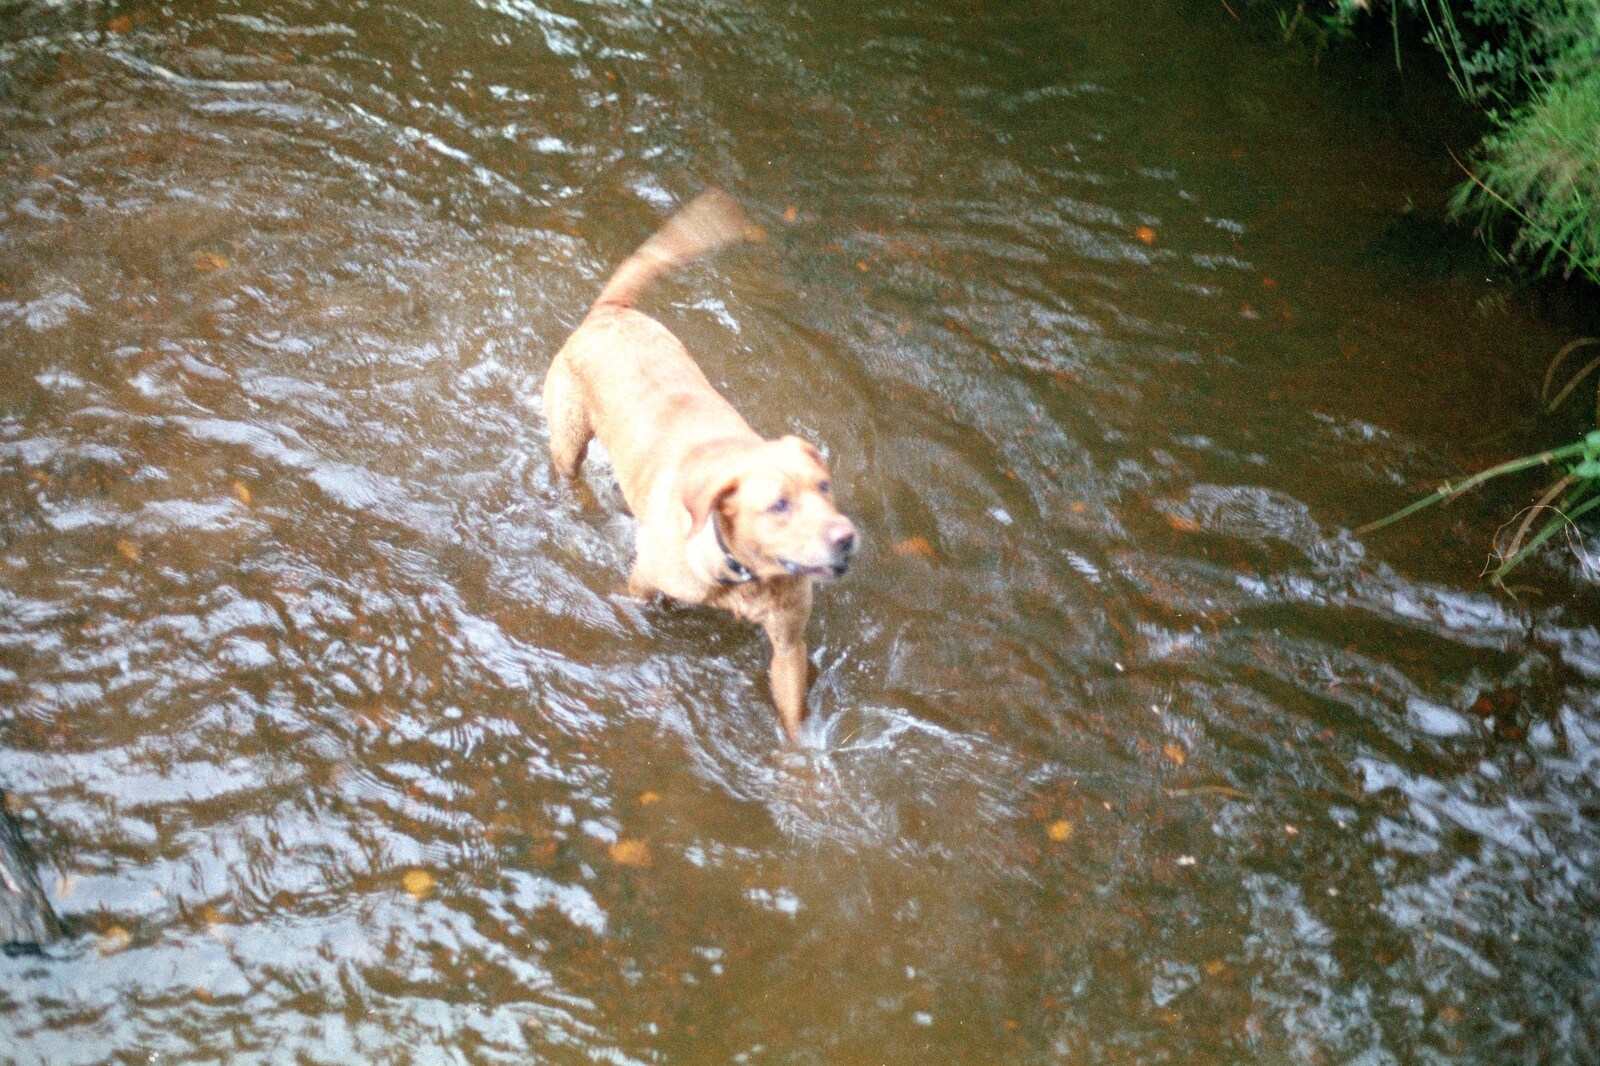 Geordie in a river from A Vineyard Miscellany, Bransgore and the New Forest - 18th July 1986